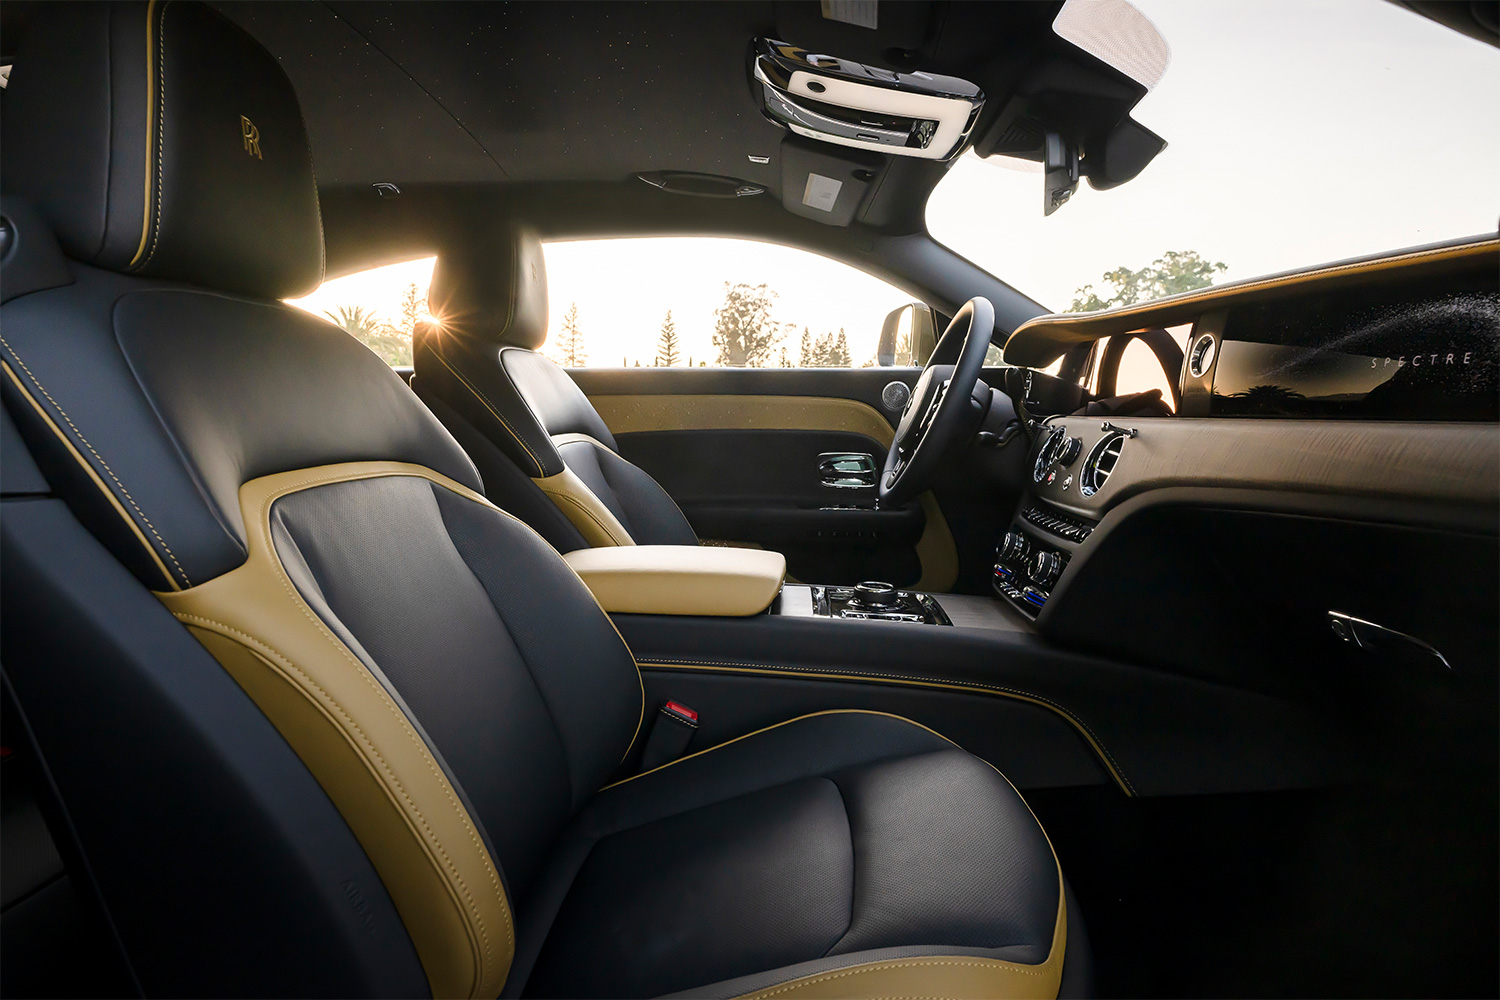 The interior of the Rolls-Royce Spectre